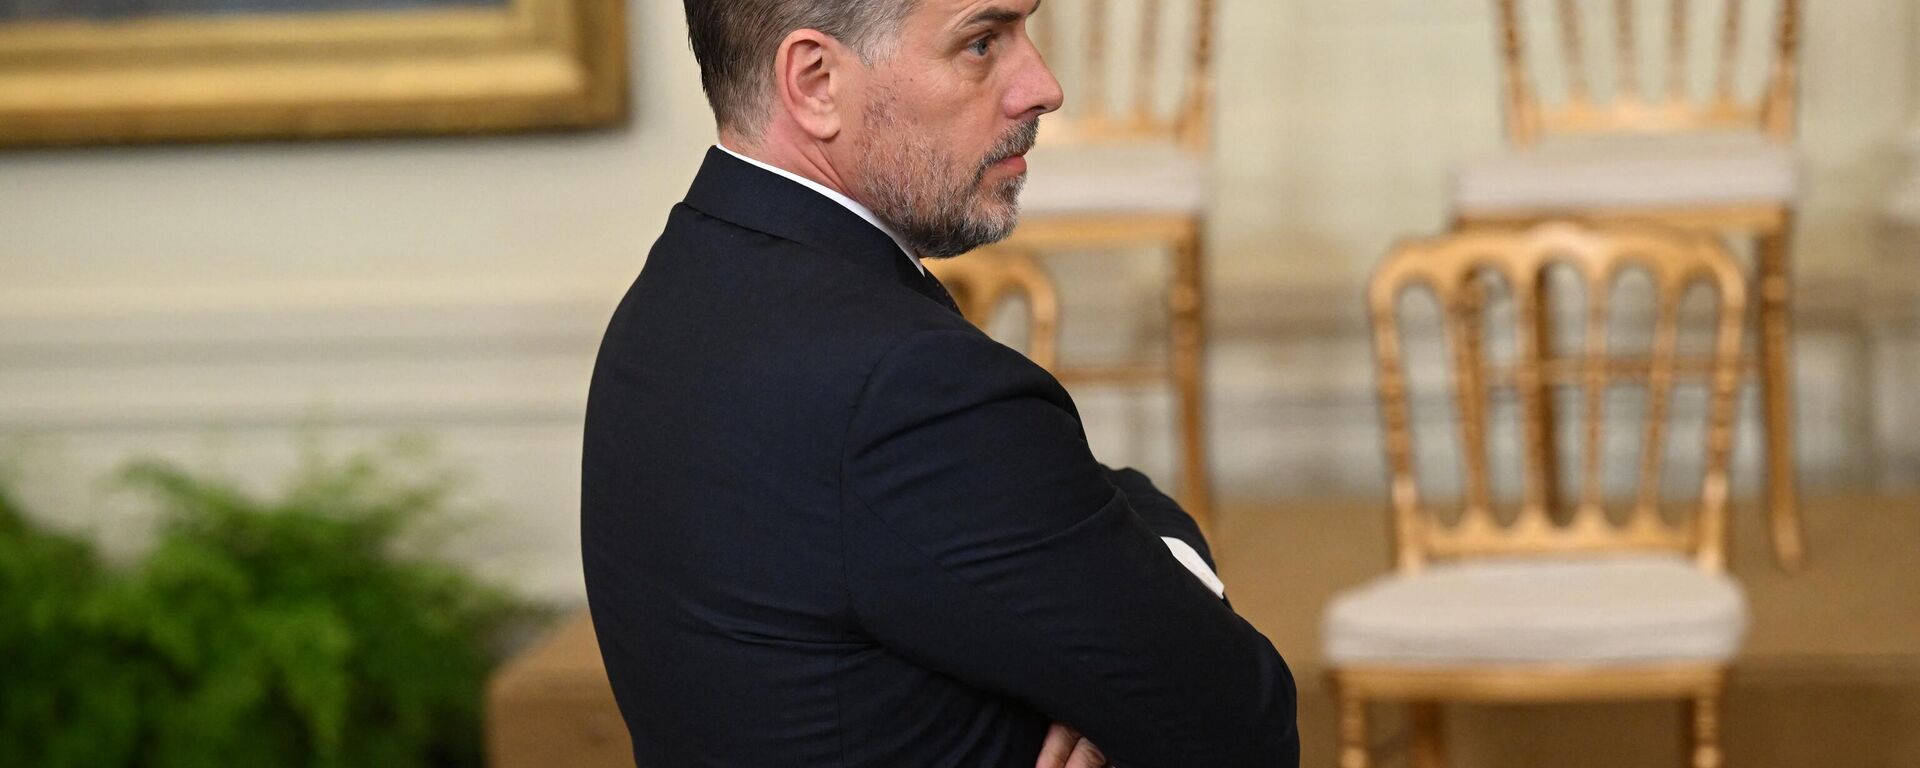 Hunter Biden attends a Presidential Medal of Freedom ceremony honoring 17 recipients, in the East Room of the White House in Washington, DC, July 7, 2022 - Sputnik International, 1920, 23.05.2023